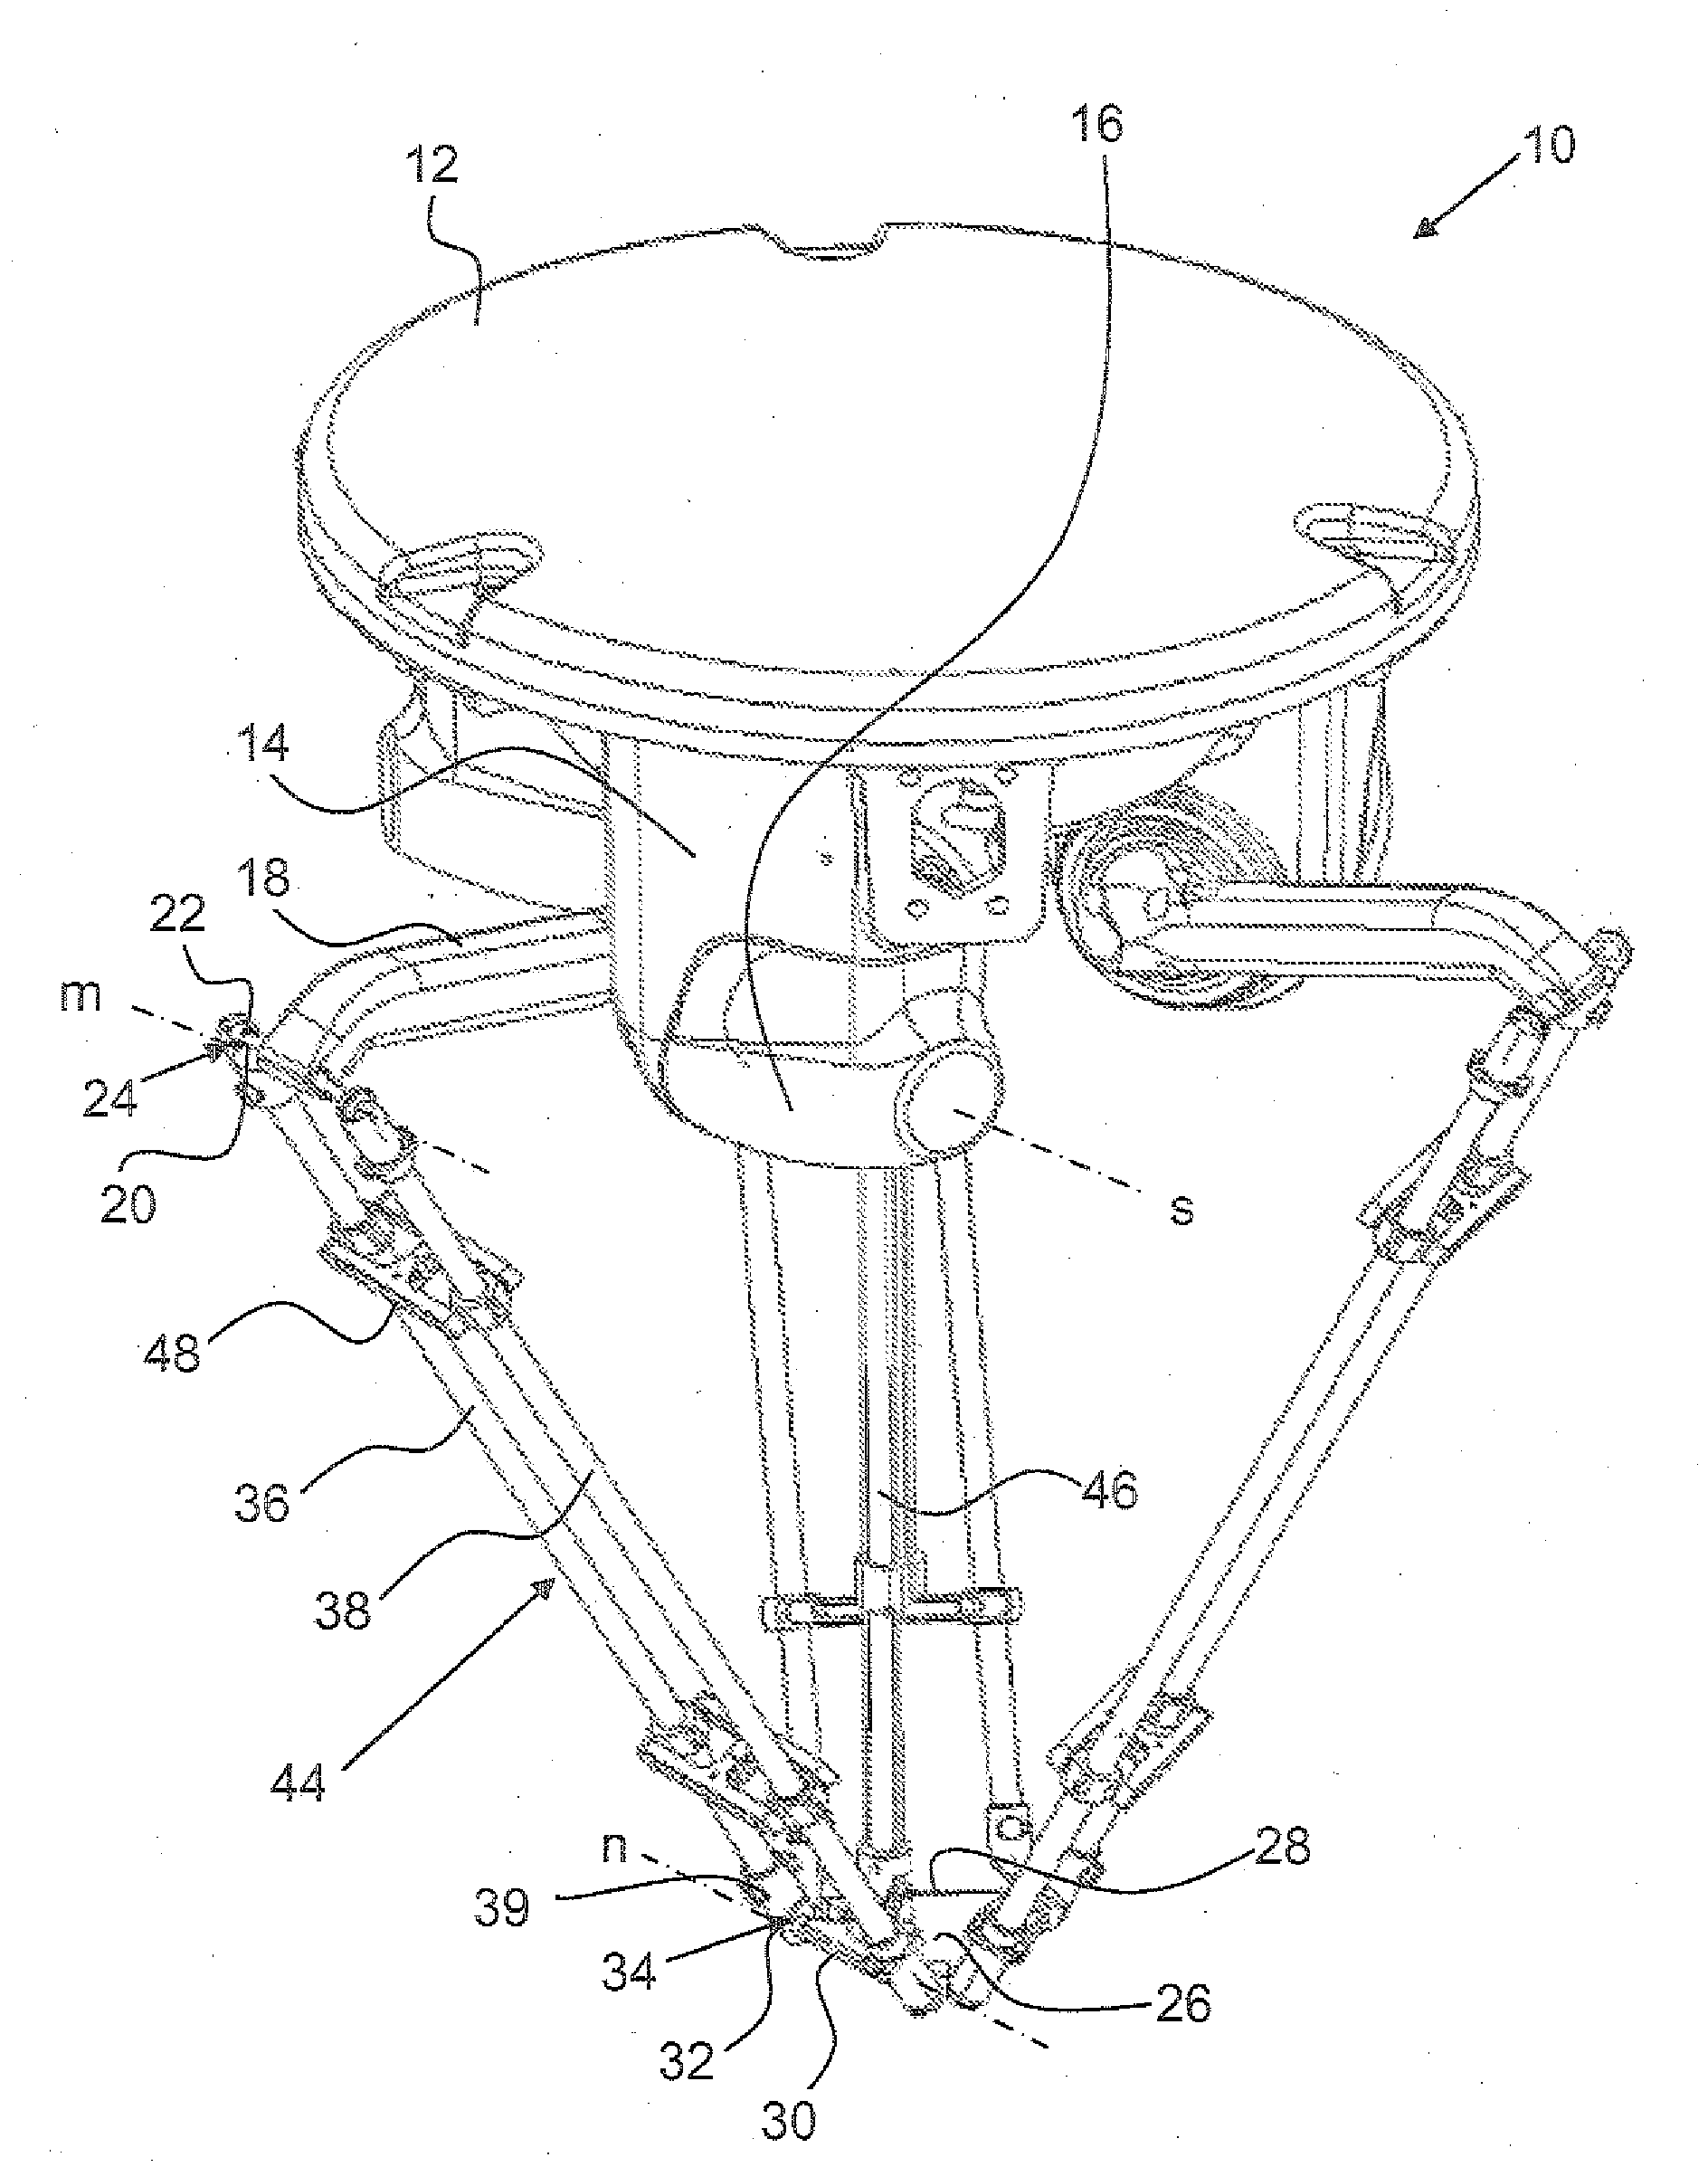 Device for displacing and positioning an object in space